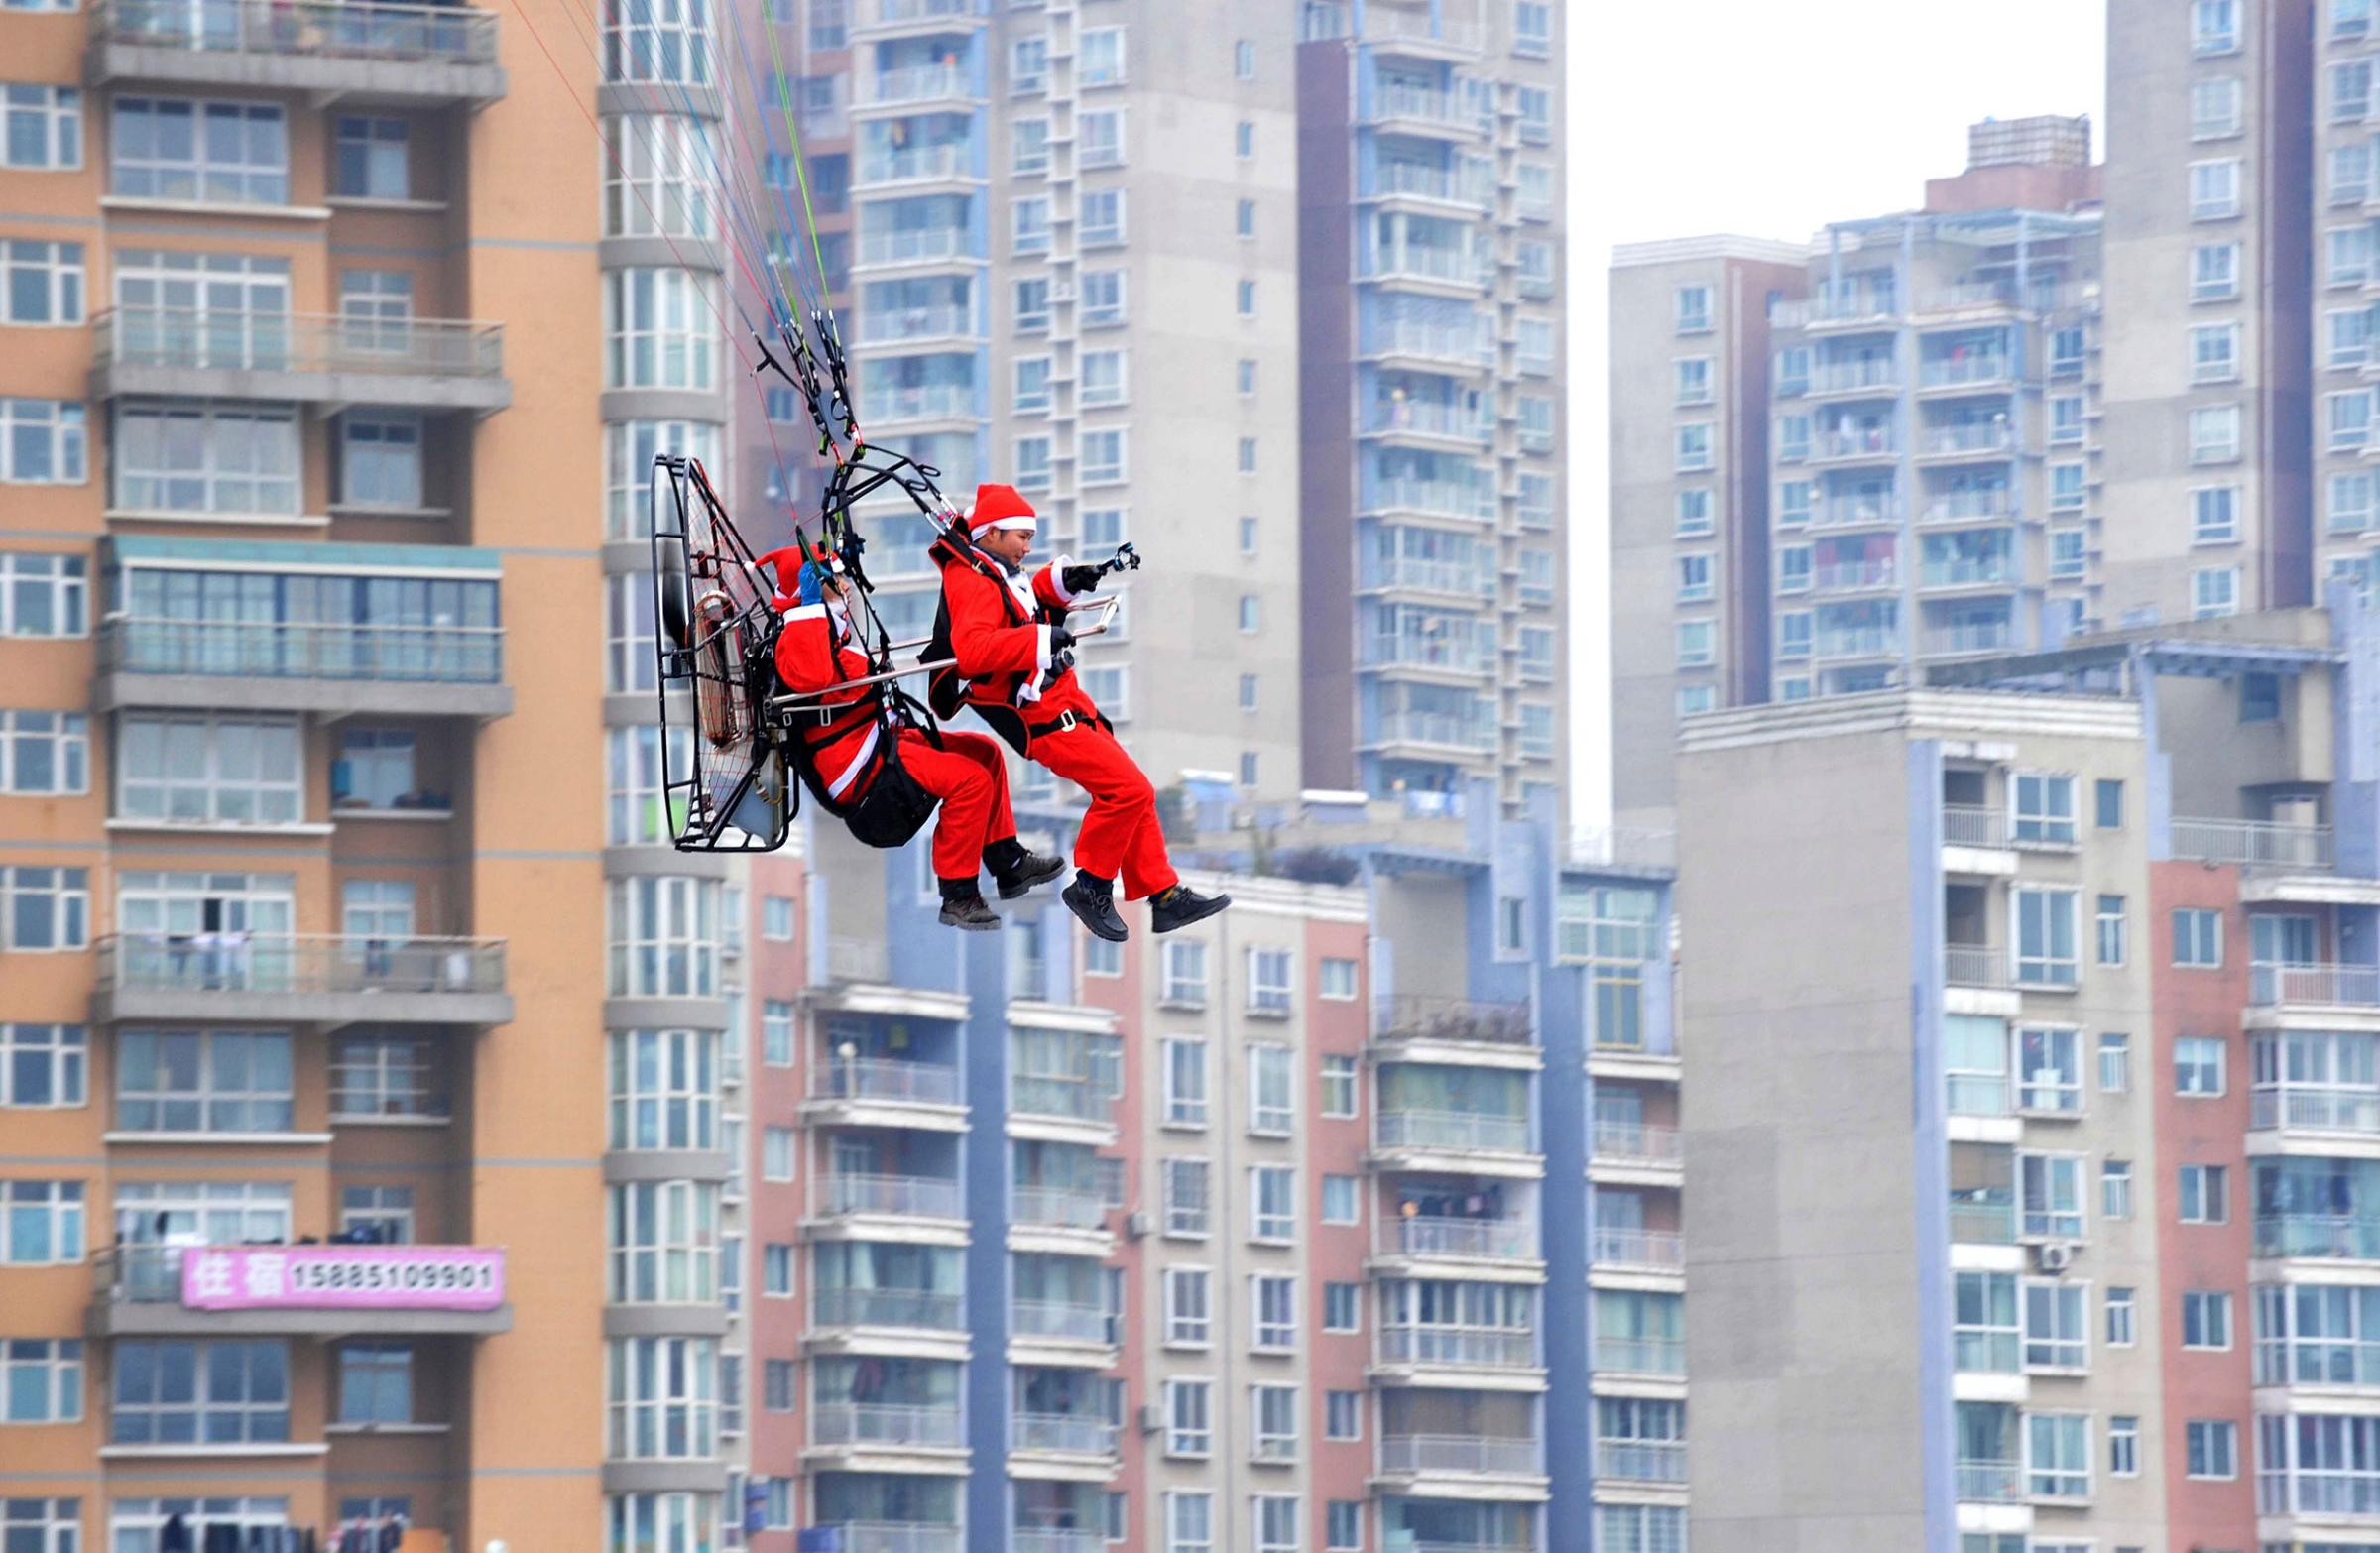 Members of a local powered parachute club wearing Santa Claus costumes fly past residential buildings to drop presents to pedestrians during a promotional event celebrating Christmas in Guiyang, Guizhou province on Dec. 24, 2014.